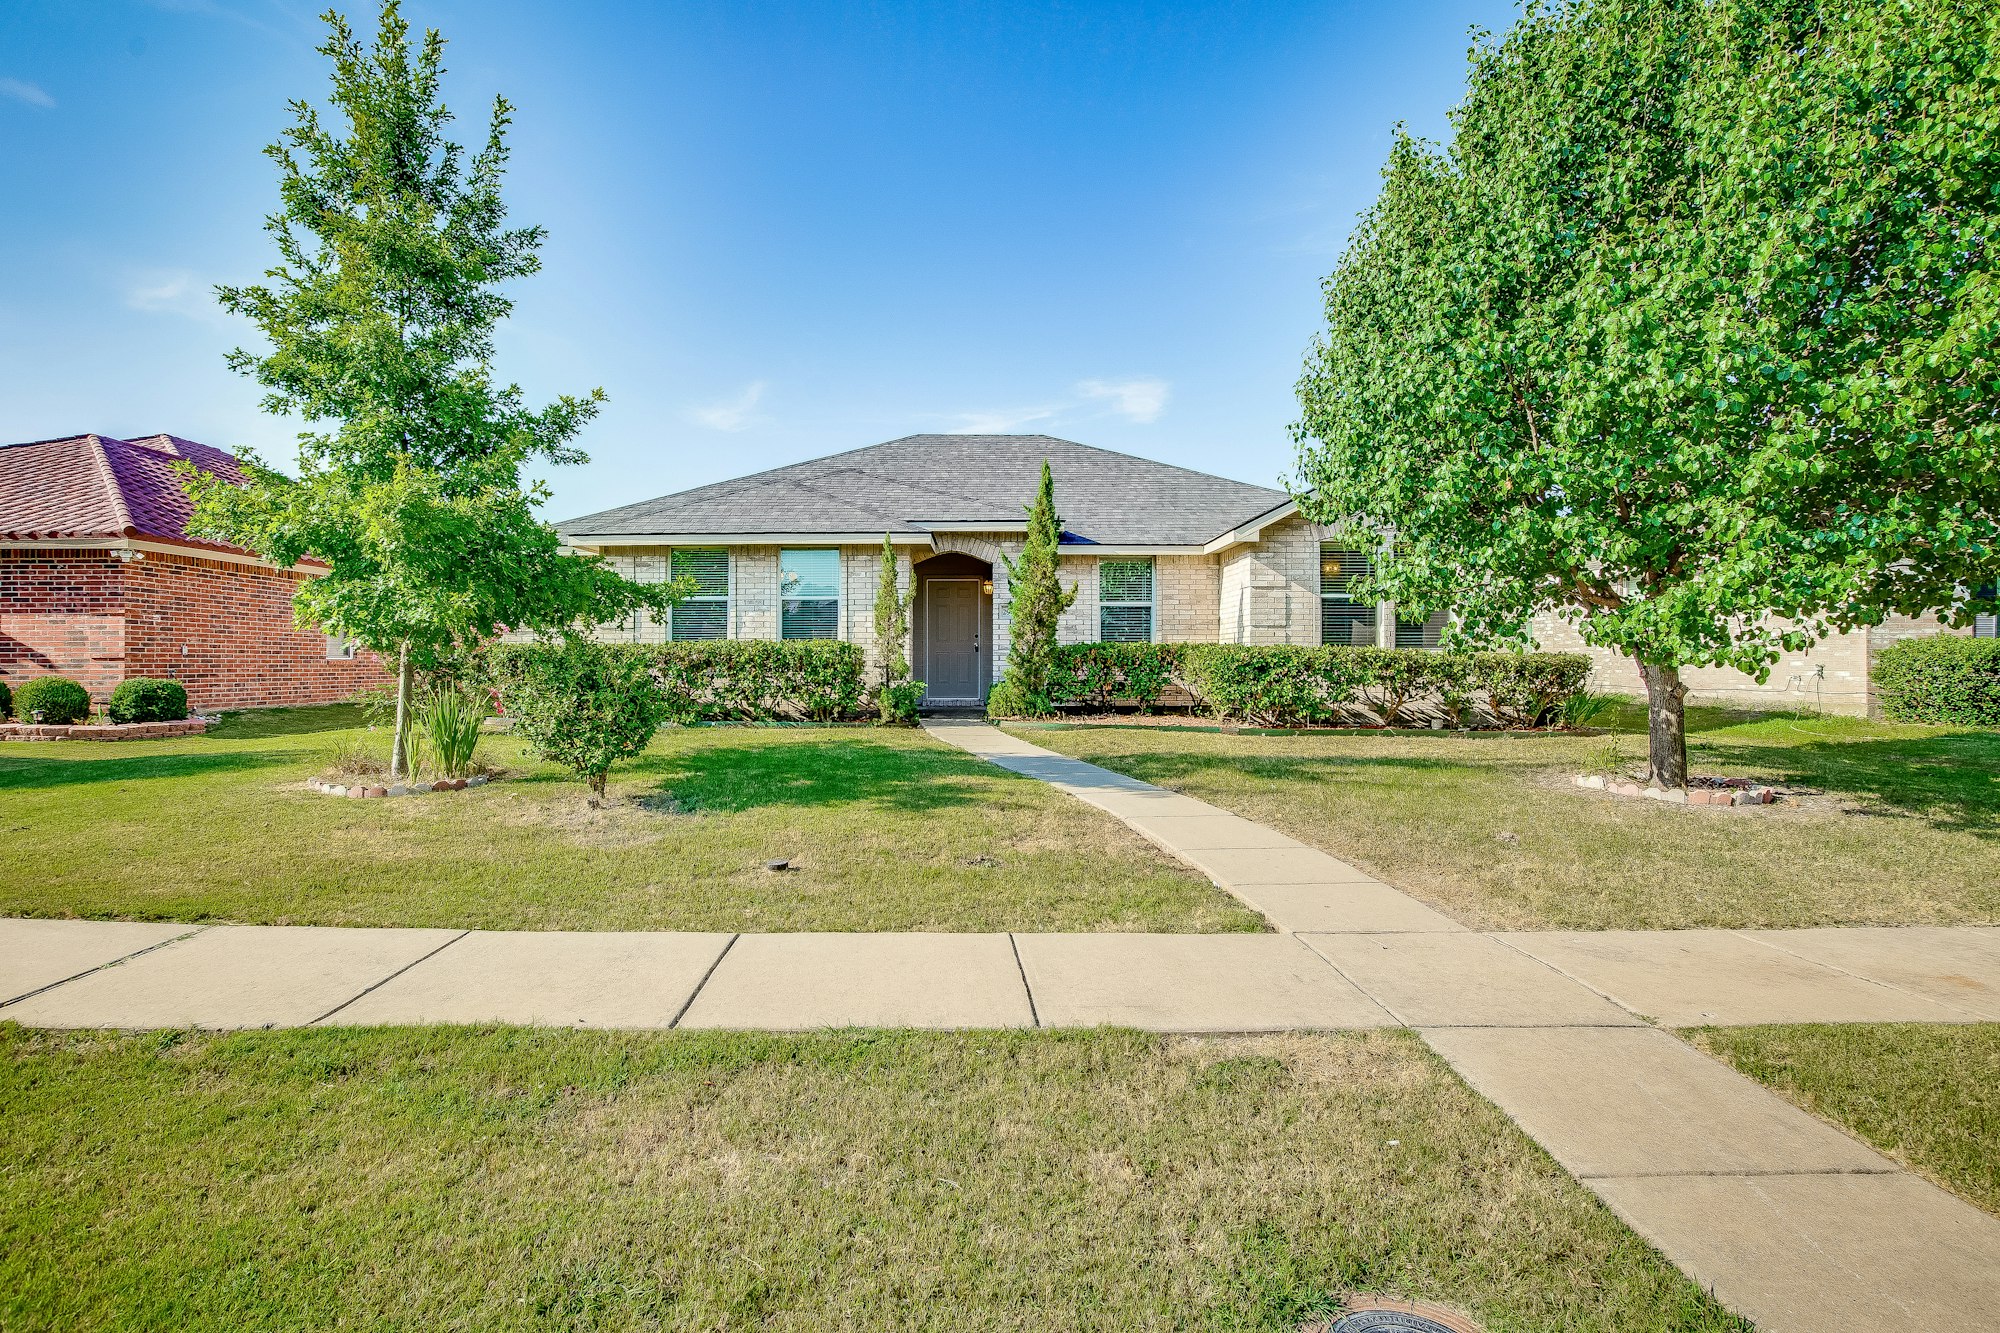 Photo 1 of 26 - 2904 Montague Trl, Wylie, TX 75098